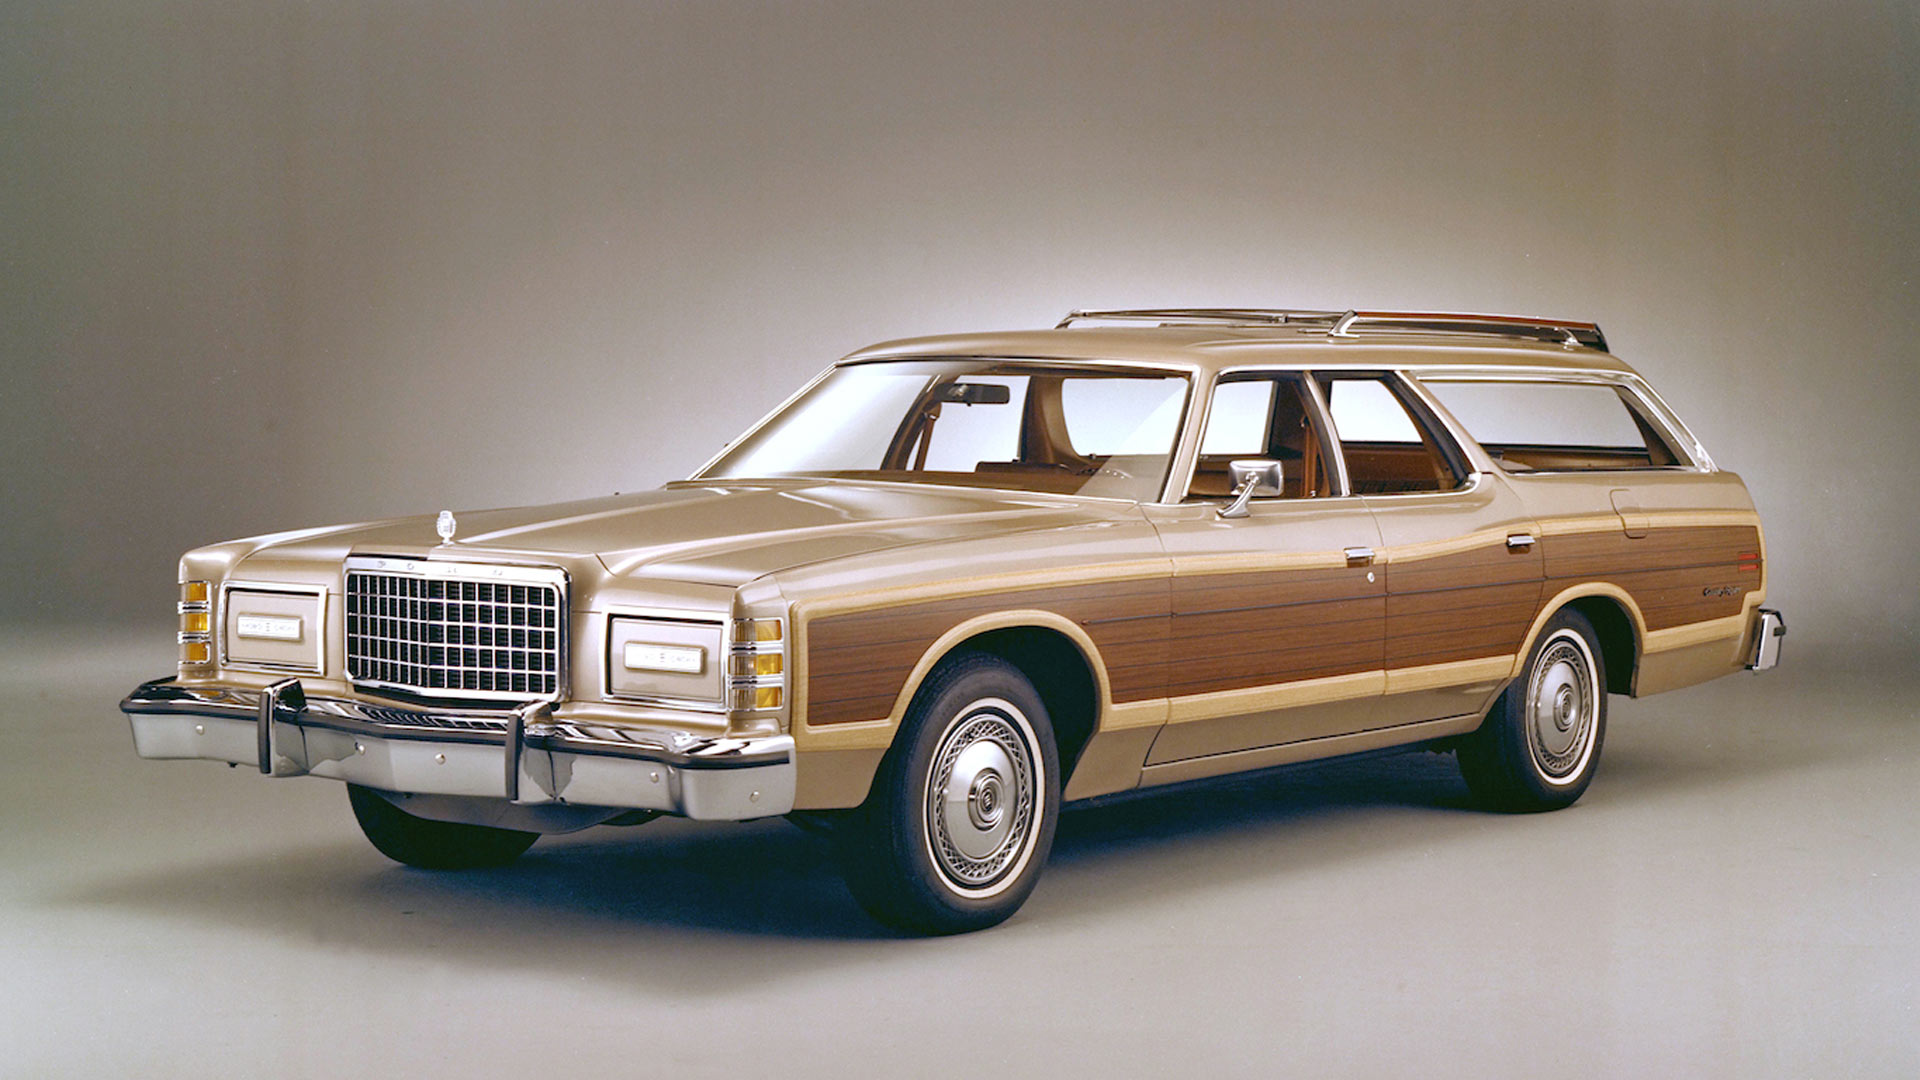 1978 Ford Country Squire – 225.7 inches